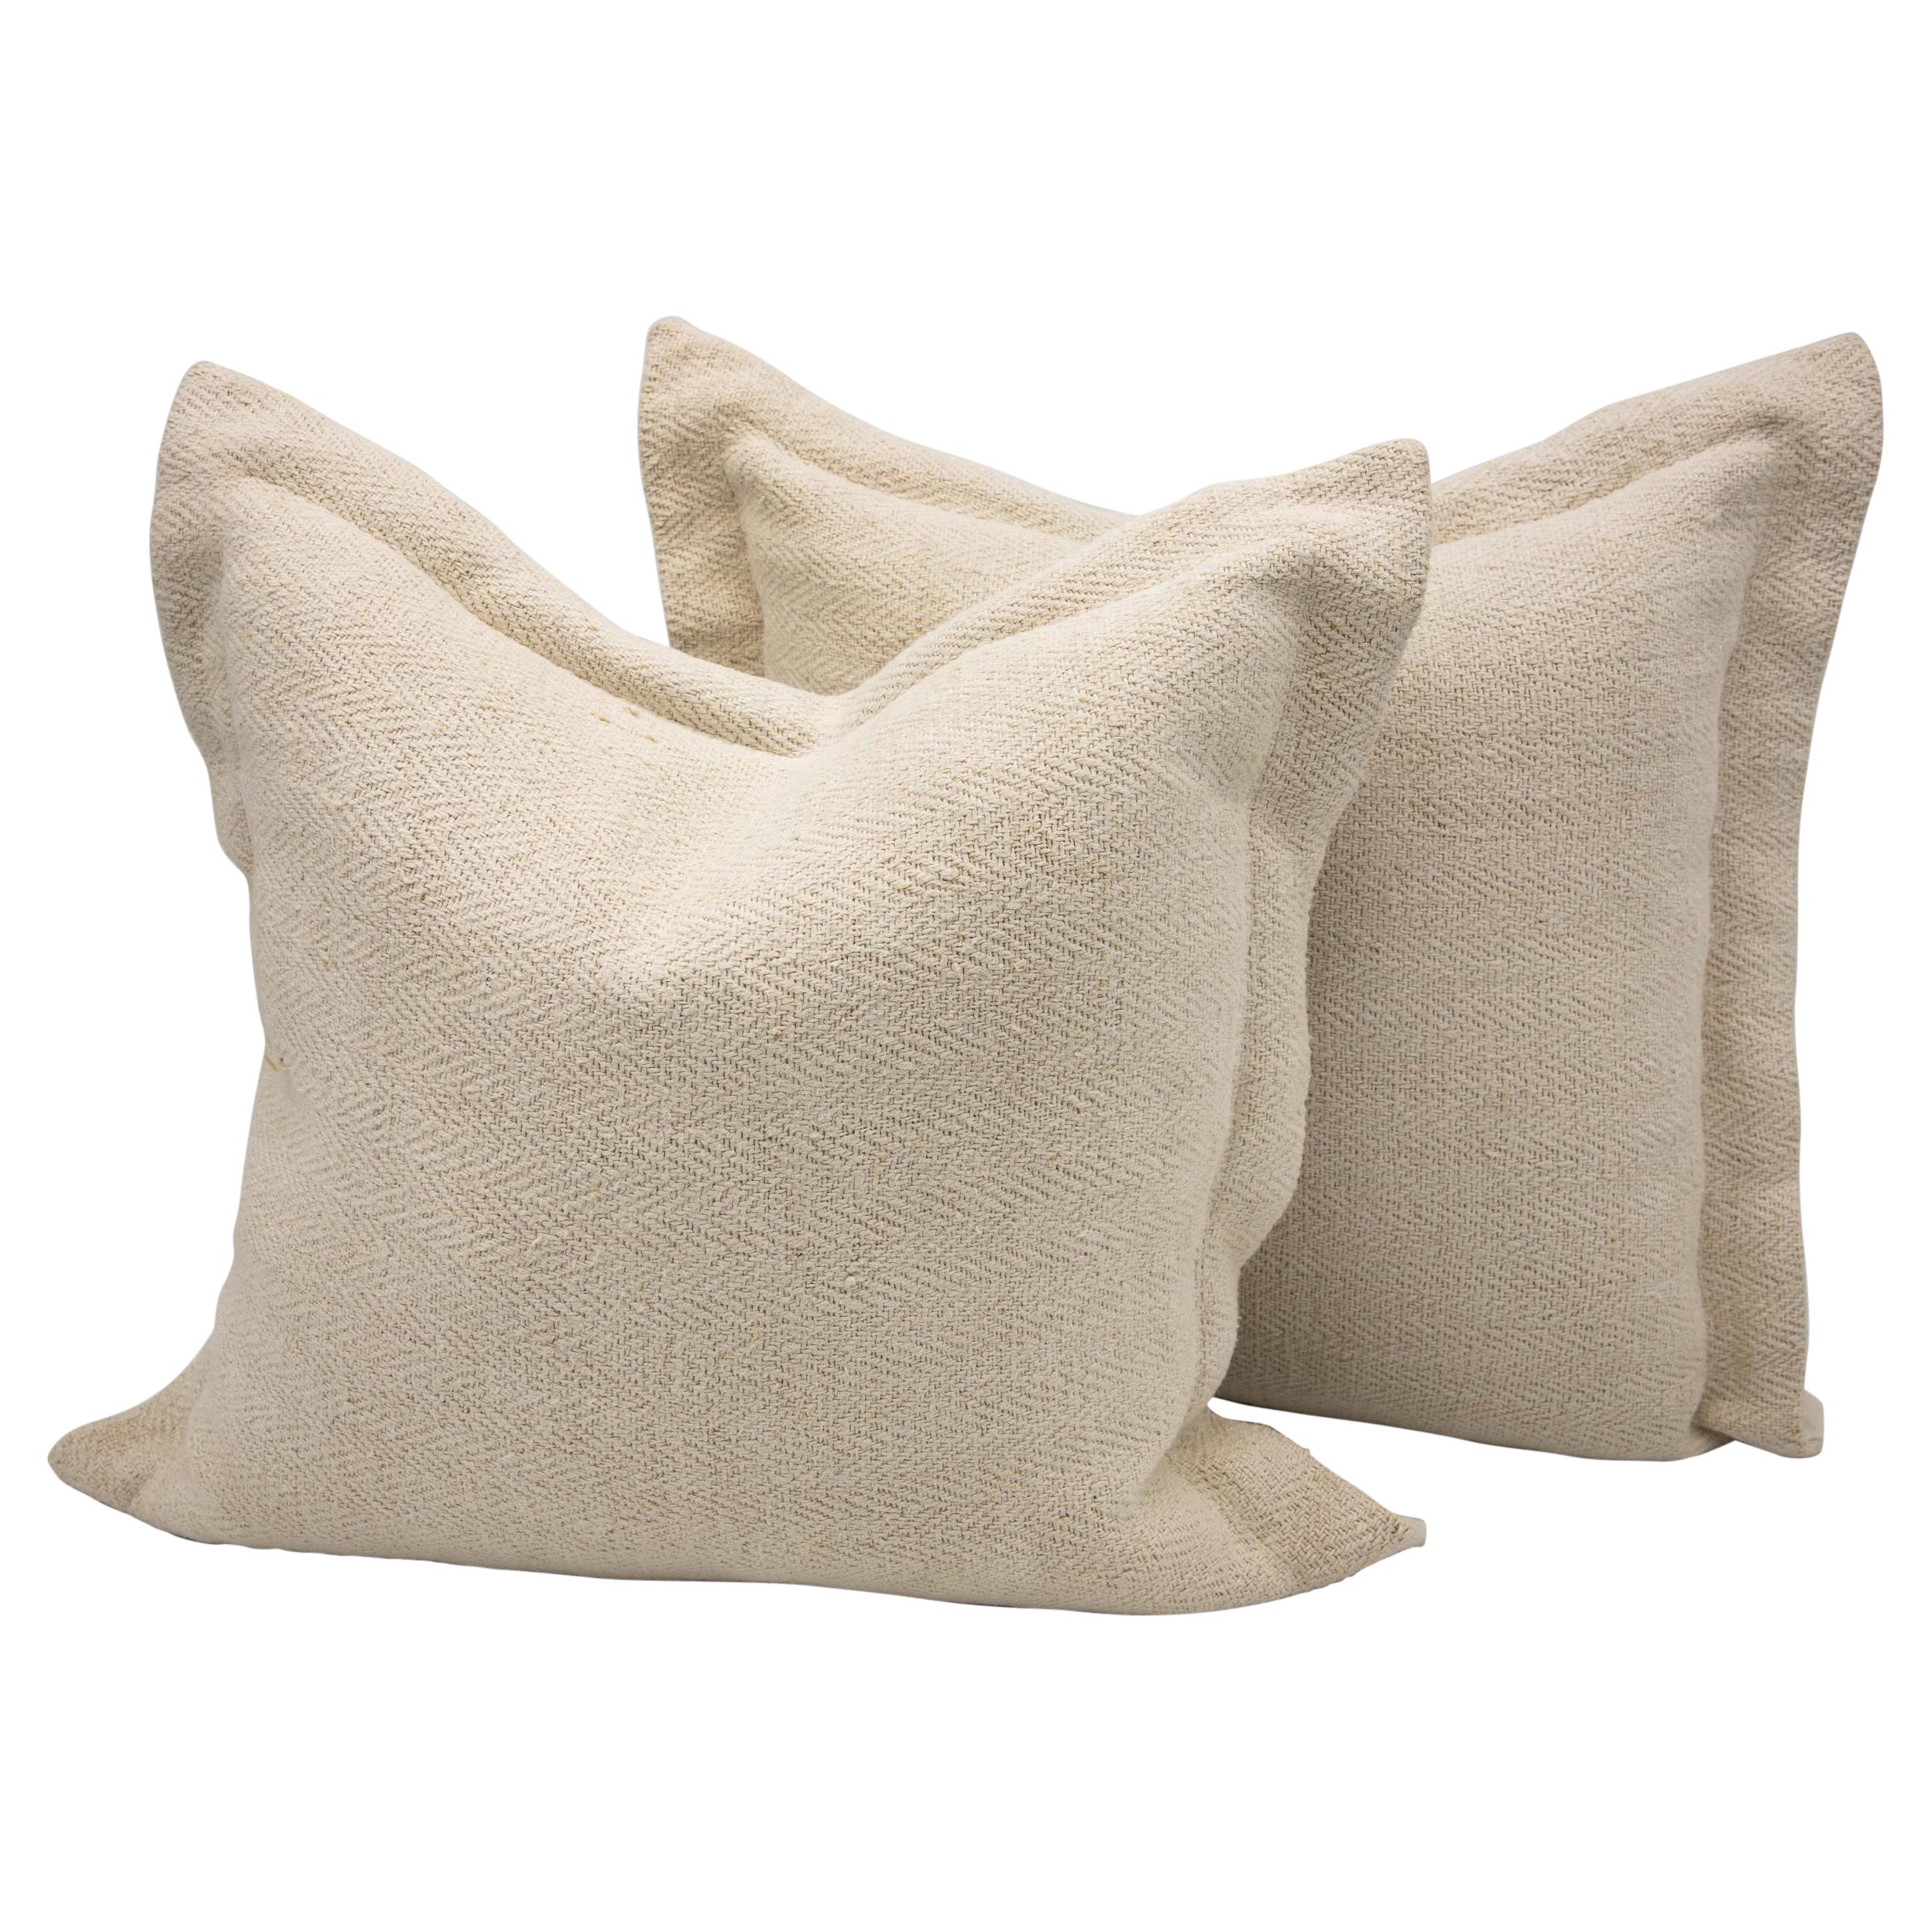 Pair of Linen Pillows For Sale